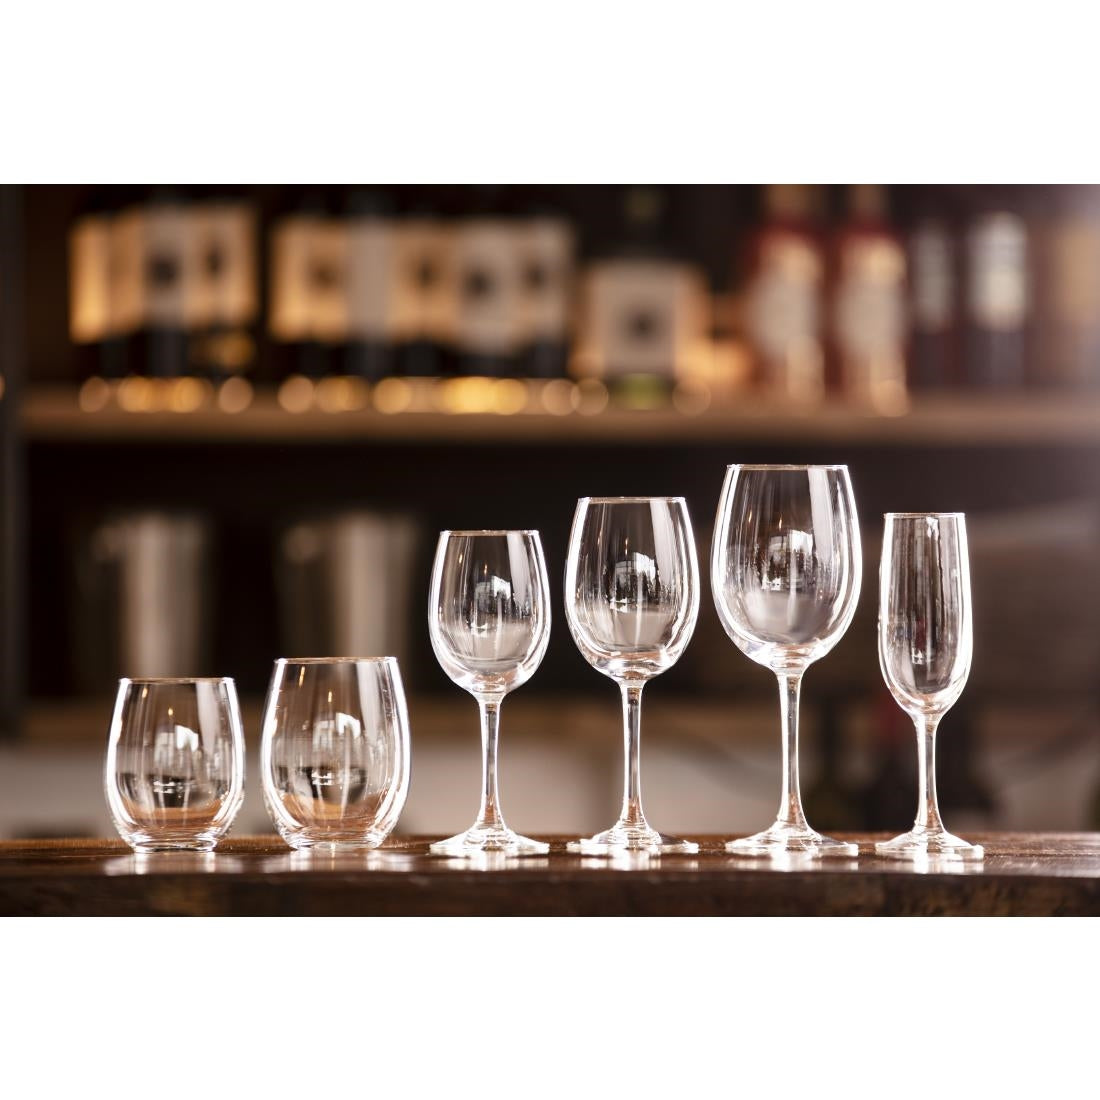 FB574 Olympia Rosario Wine Glasses 350ml (Pack of 6) JD Catering Equipment Solutions Ltd